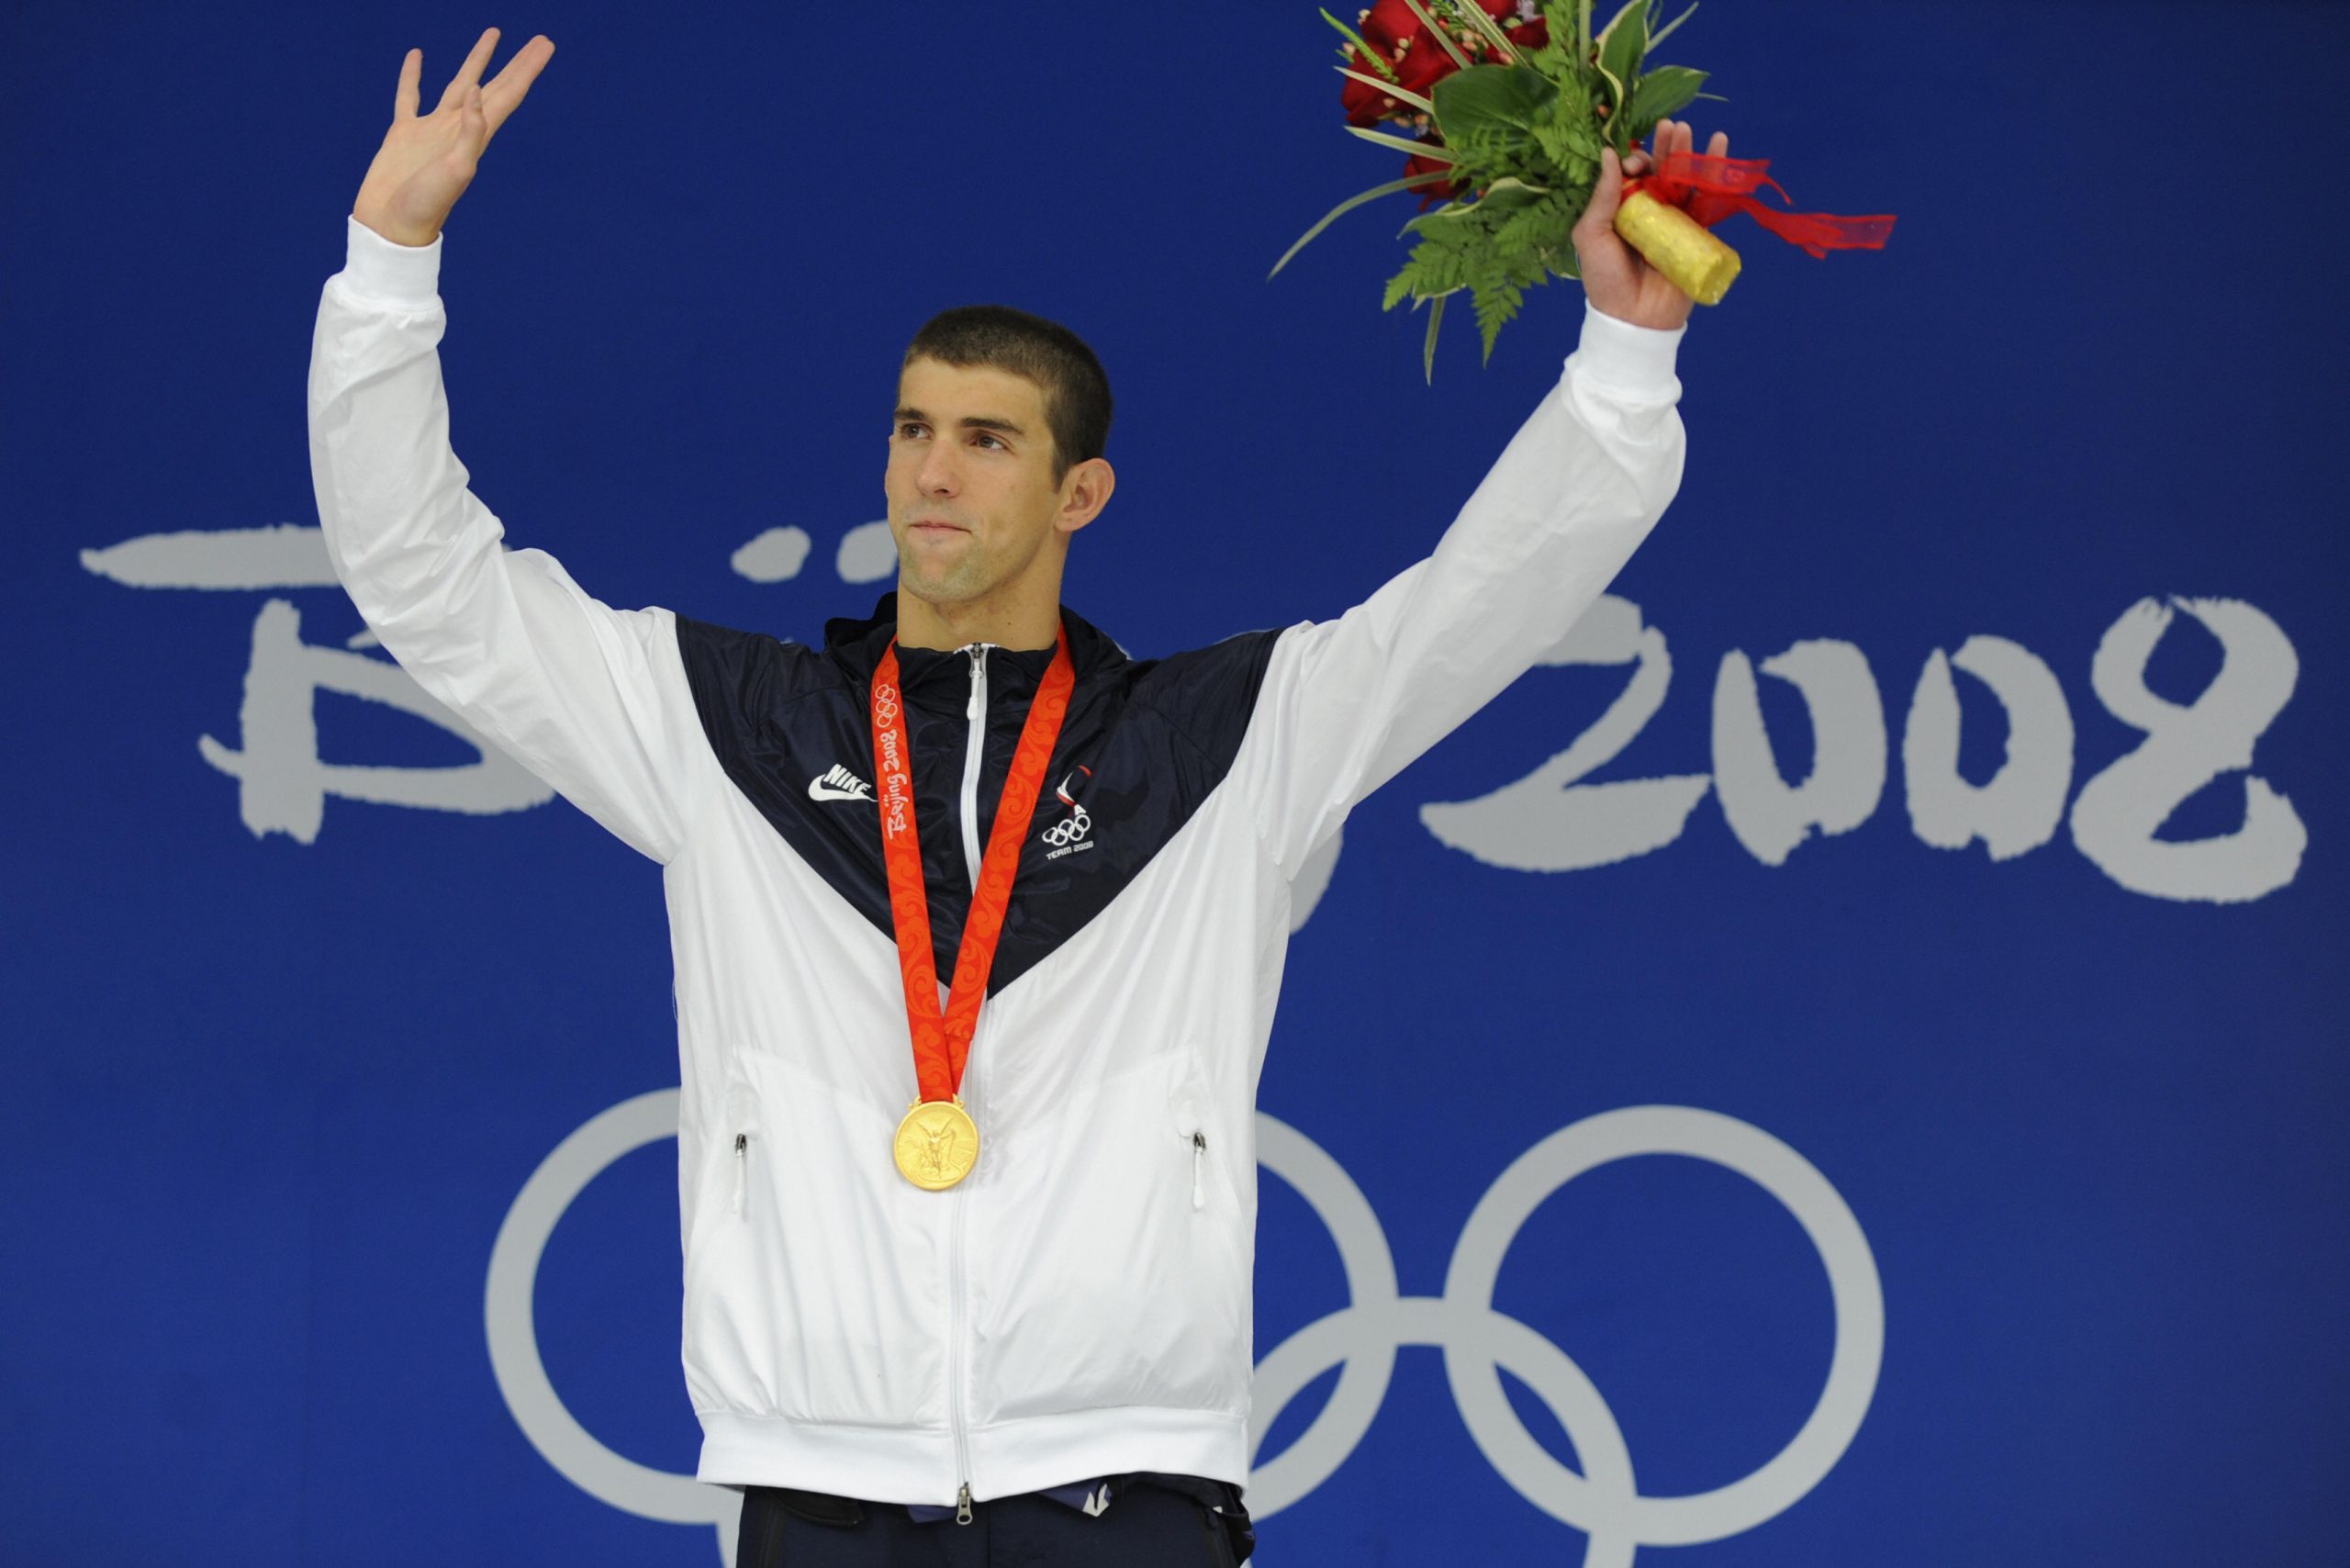 US swimmer Michael Phelps stands on the